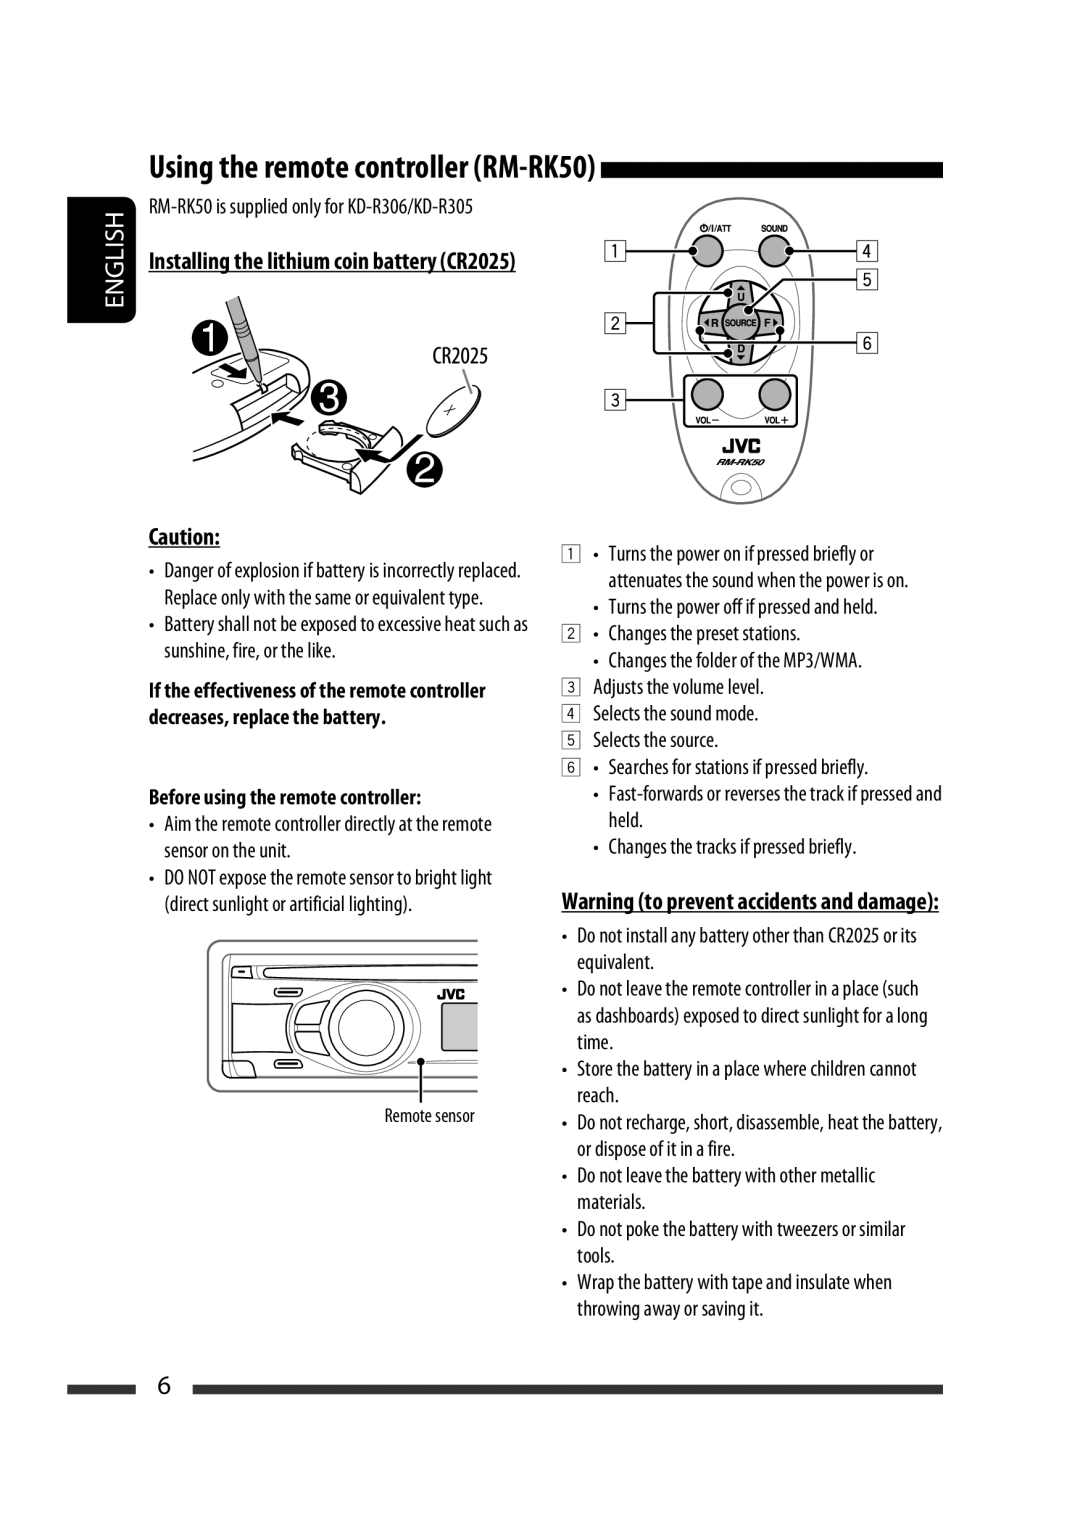 JVC KD-R303 manual Using the remote controller RM-RK50, Installing the lithium coin battery CR2025, English, Remote sensor 